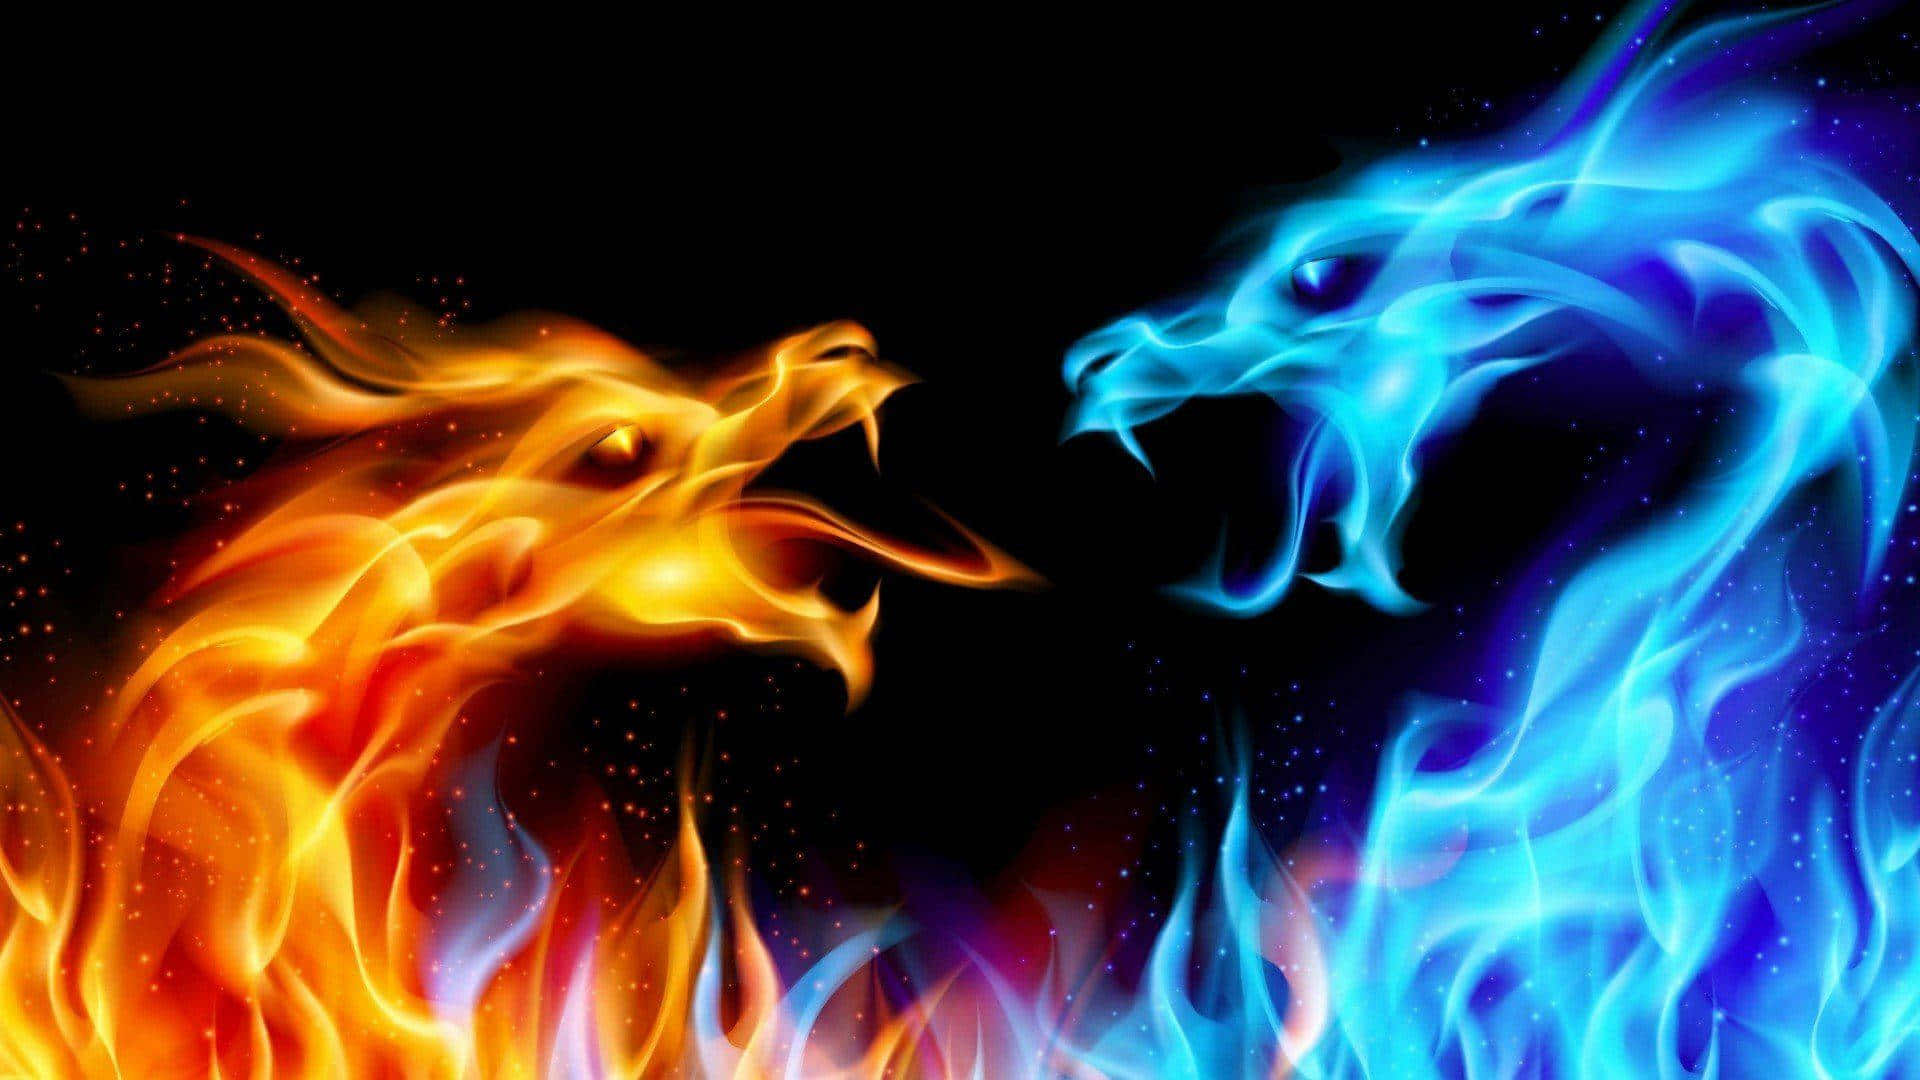 Two Dragons Fighting In The Fire Wallpaper